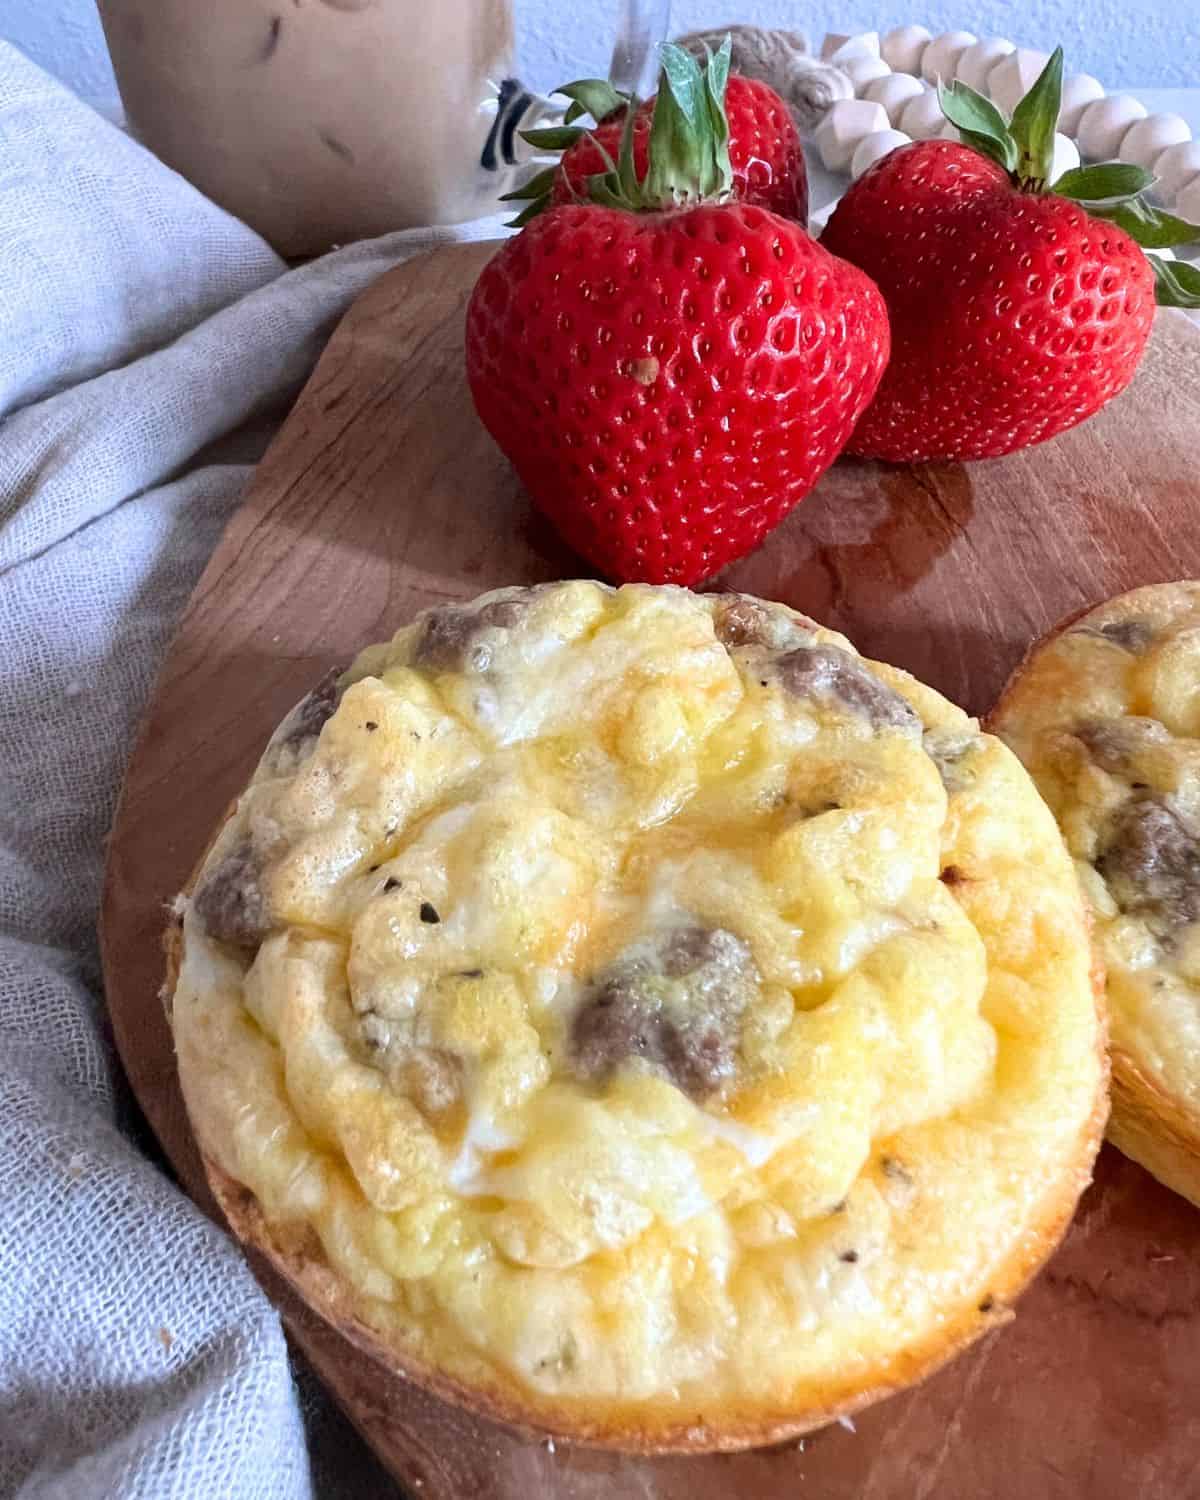 Finished egg and sausage muffins on a wood board with strawberries. 